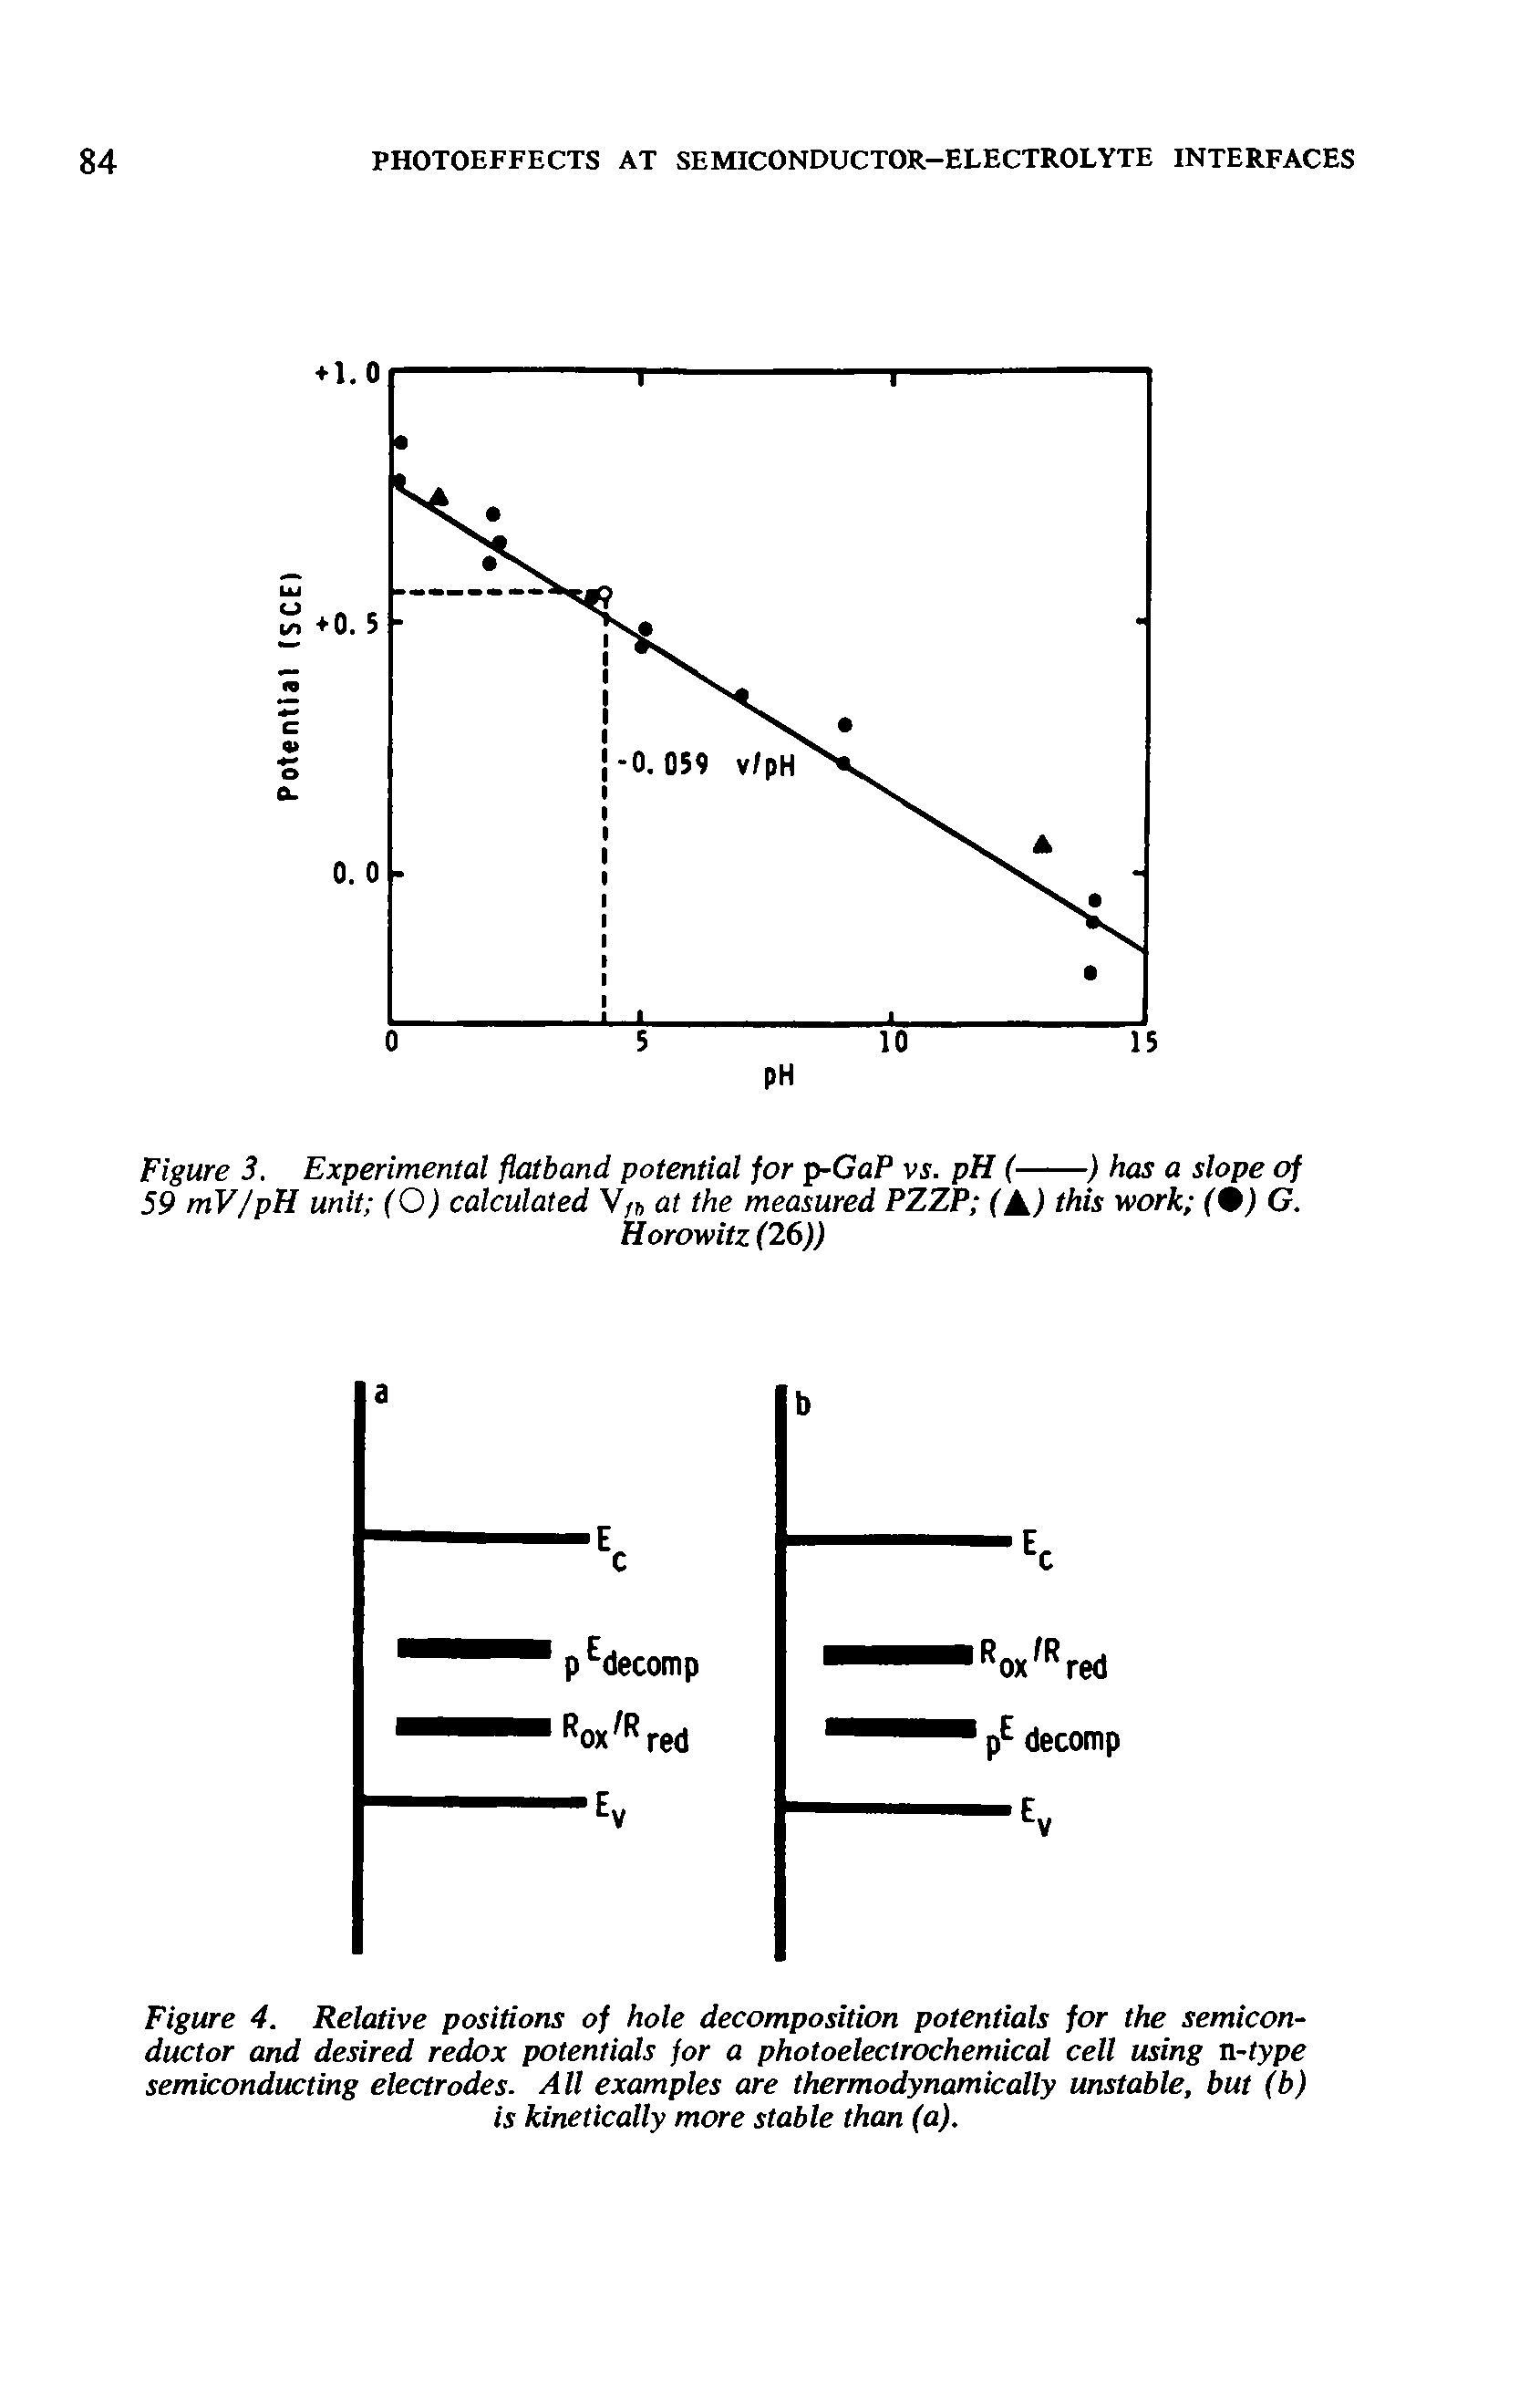 Figure 4. Relative positions of hole decomposition potentials for the semiconductor and desired redox potentials for a photoelectrocheniical cell using n-type semiconducting electrodes. All examples are thermodynamically unstable, but (b) is kinetically more stable than (a).